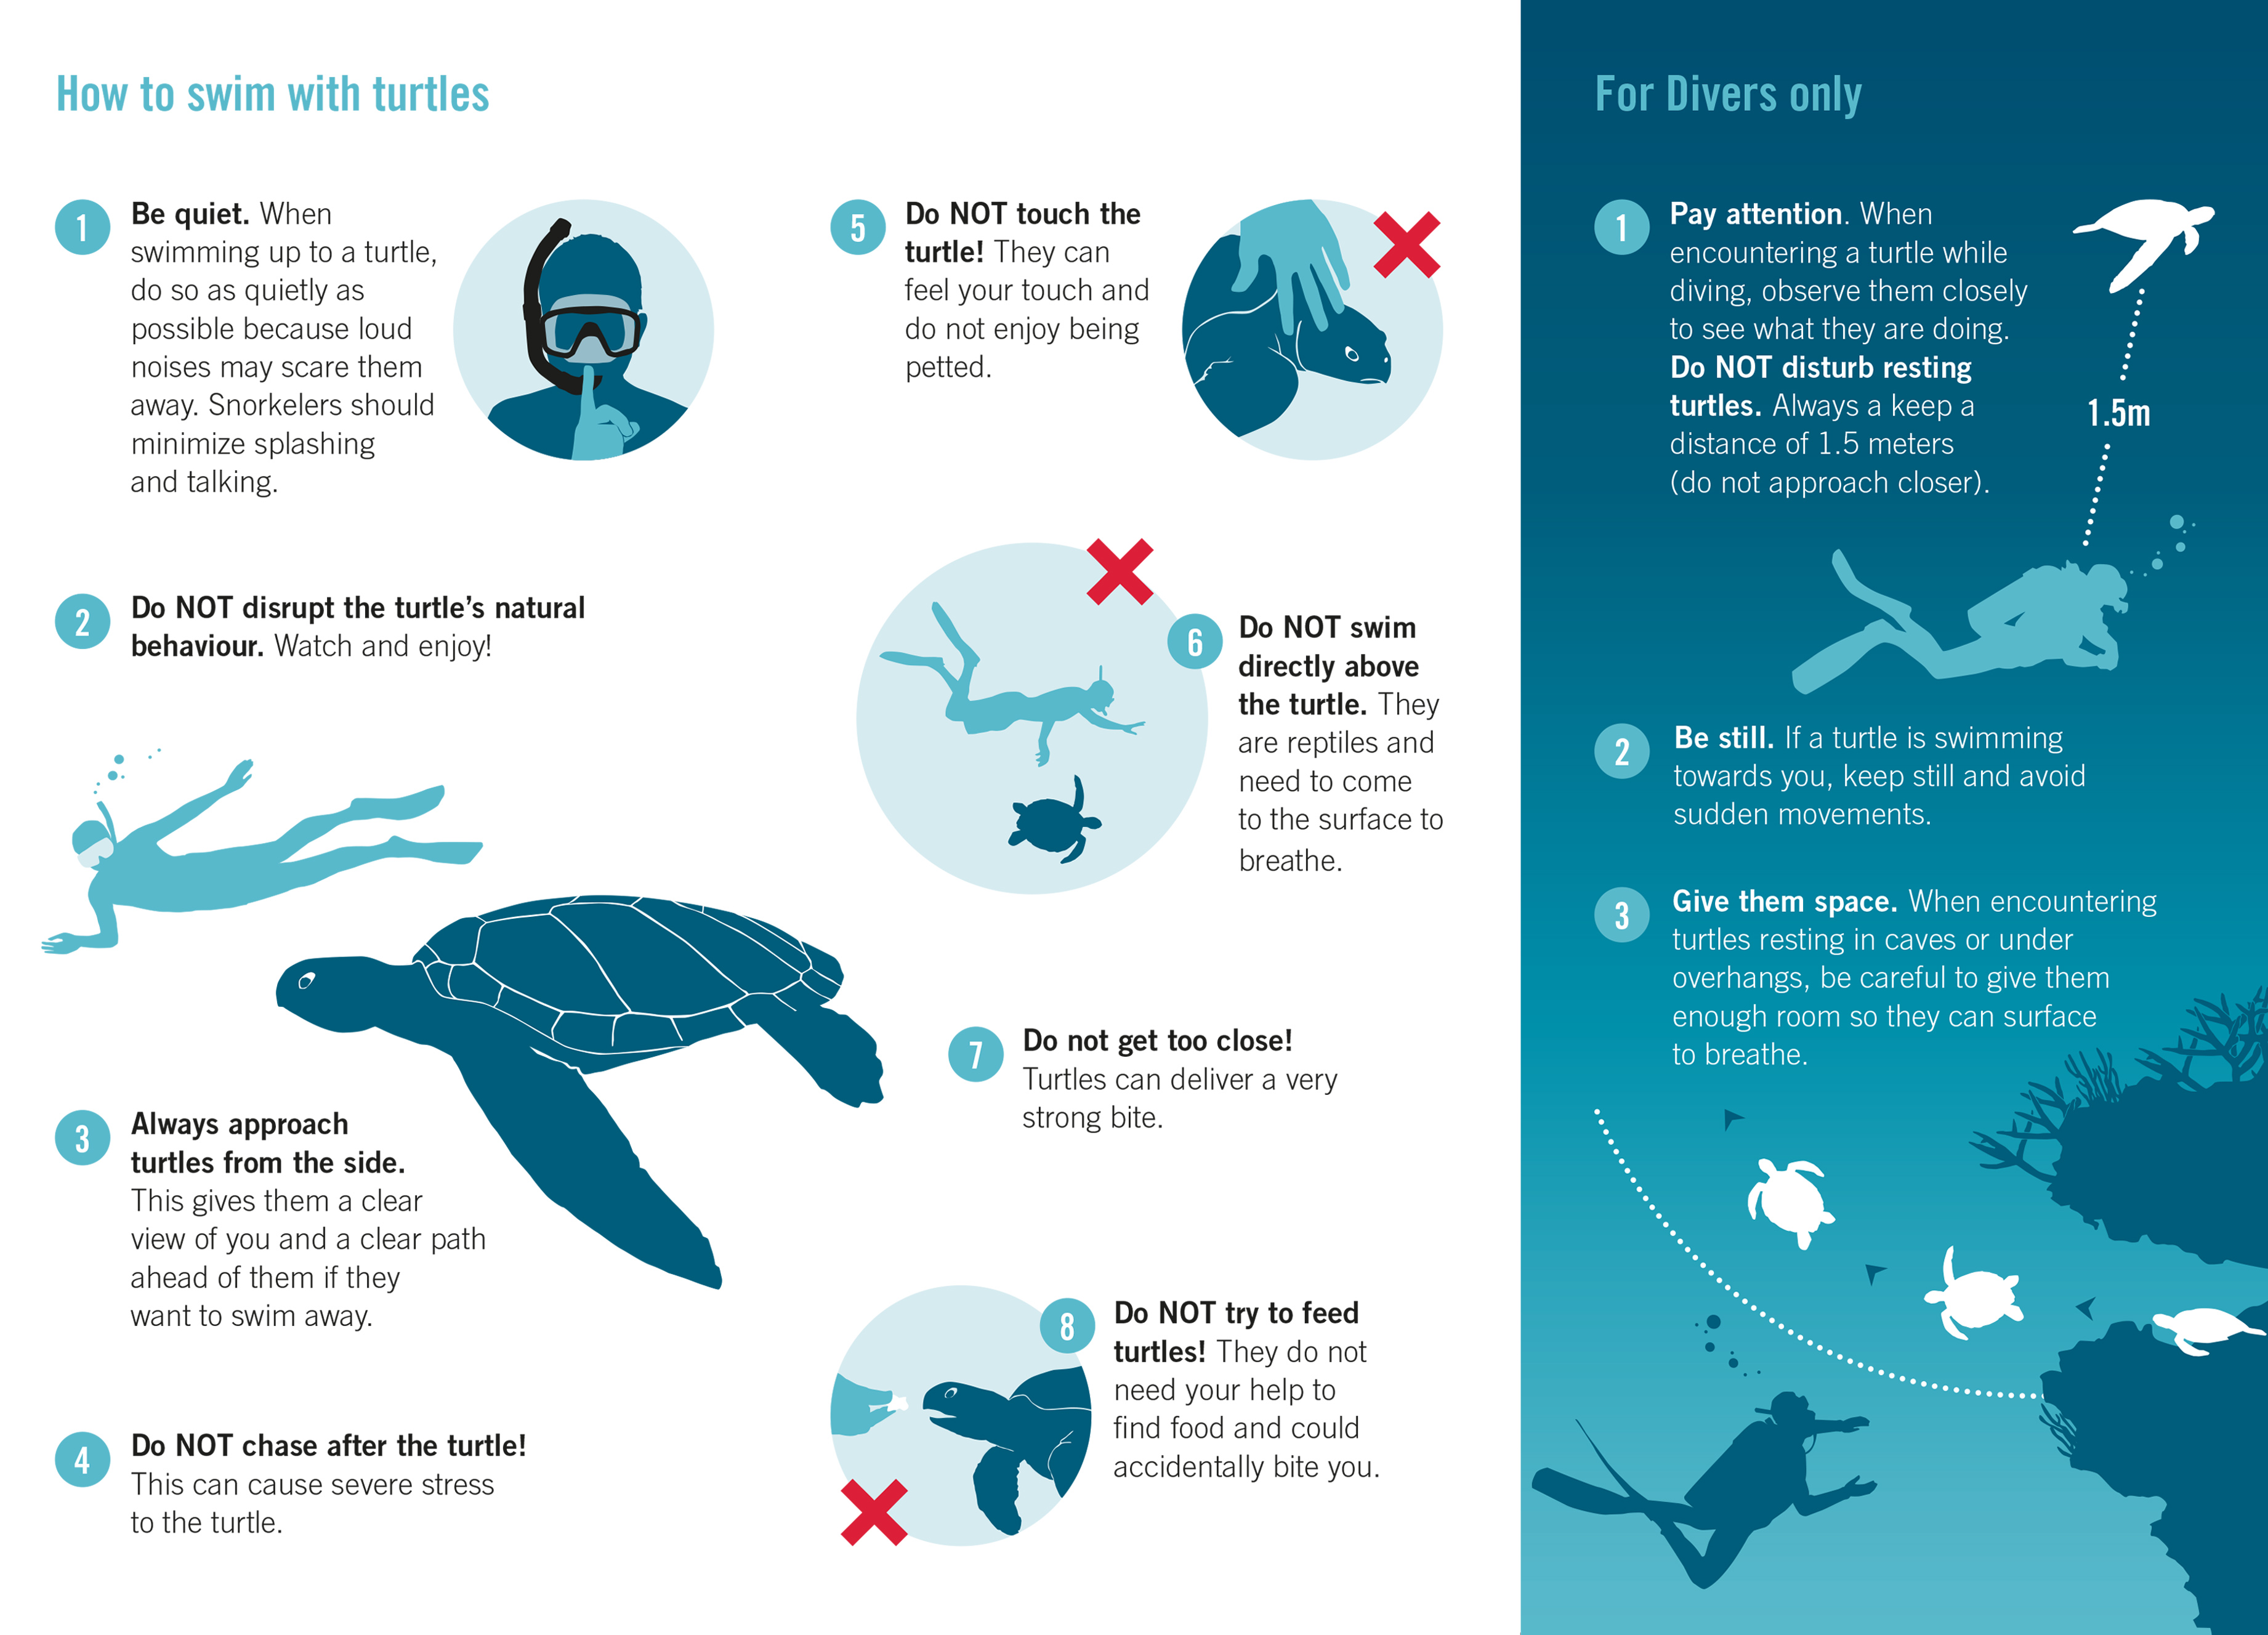 ORP Turtles Code of Conduct